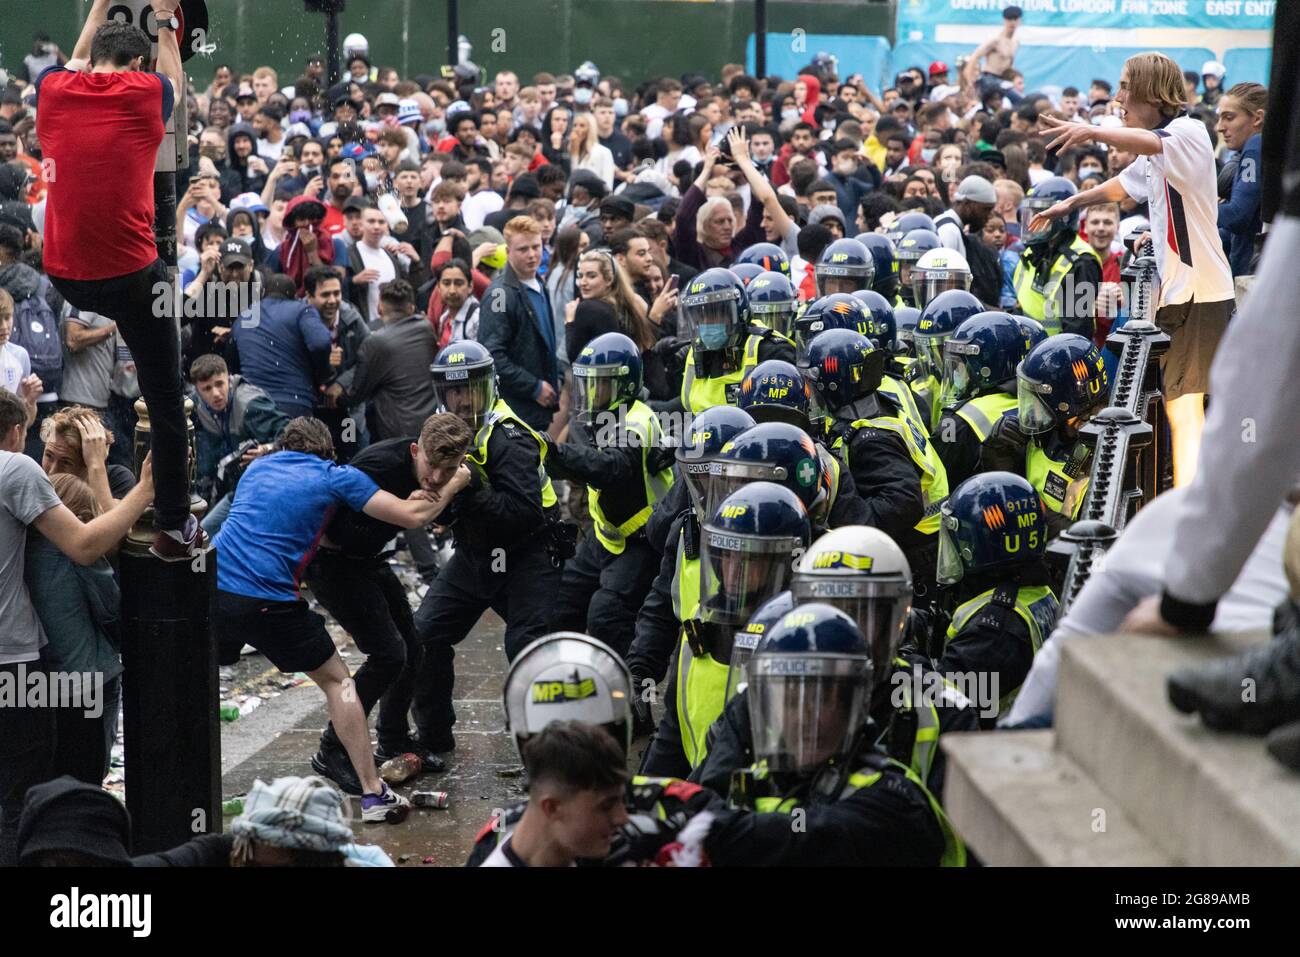 Police clash with football fans during the England vs Italy Euro 2020 final, Trafalgar Square, London, 11 July 2021 Stock Photo